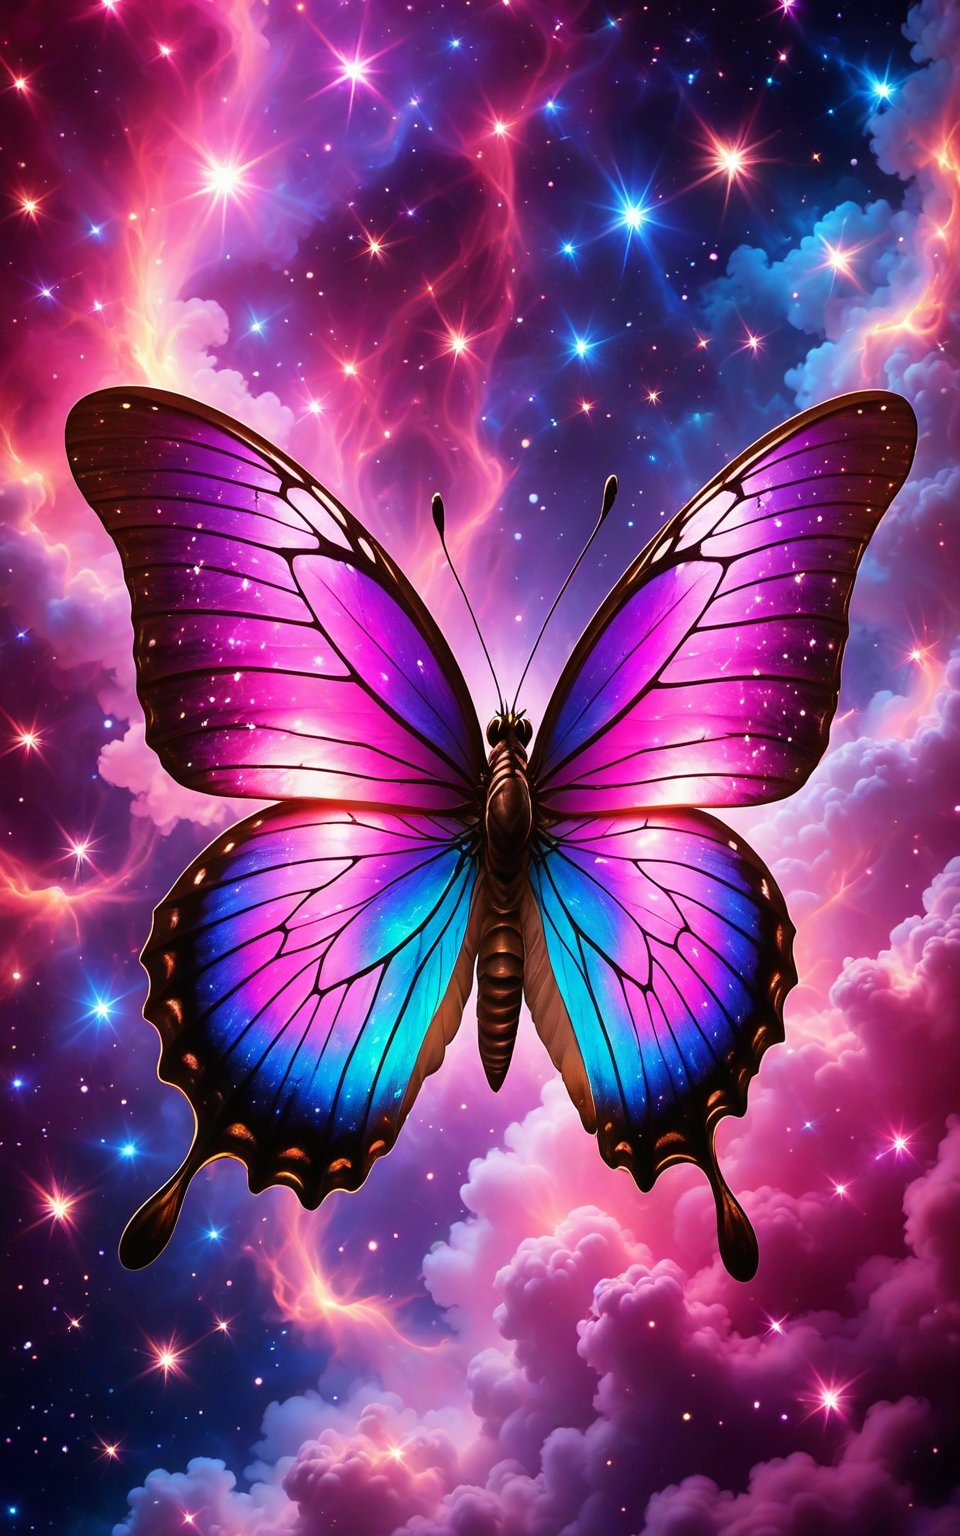 (best quality, 4K, 8K, high-resolution, masterpiece), ultra-detailed, realistic, photorealistic, ethereal butterfly, cosmic background, shimmering stars, nebula clouds, purple and pink color scheme, glowing wings, sparkling particles, magical atmosphere, dynamic lighting, high contrast, detailed wing texture, celestial ambiance, high detail, high resolution, mesmerizing visuals, cosmic butterfly, starry sky, nebula, vibrant colors, delicate details.